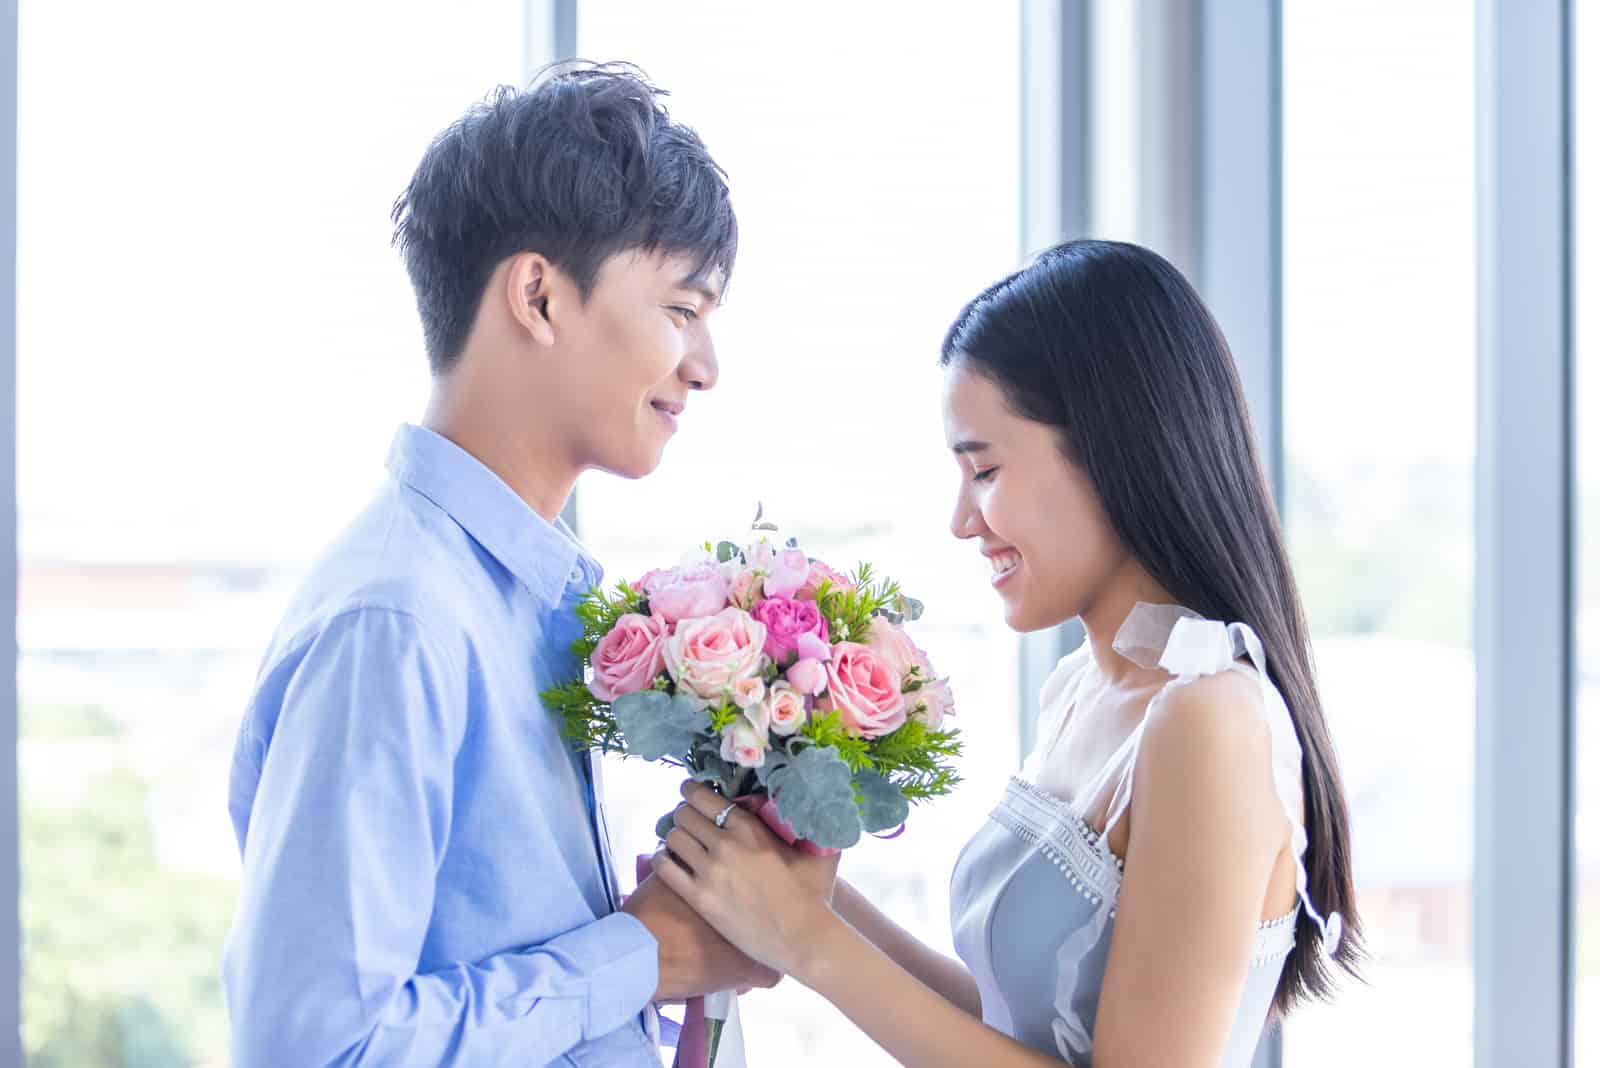 a man gives a gift of a bouquet of roses to a woman